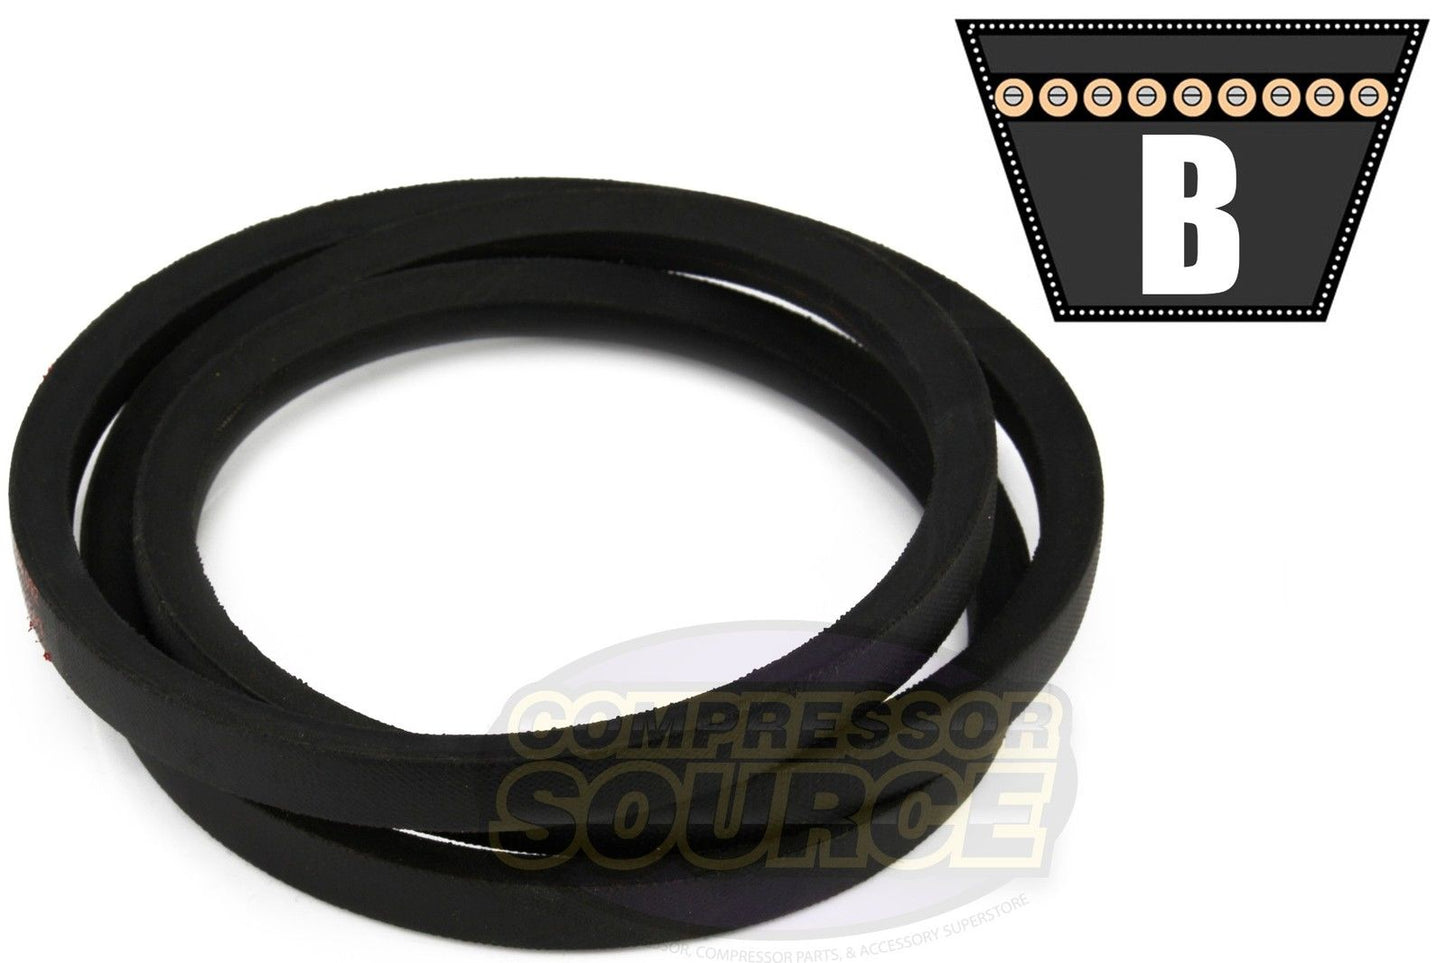 B41 Replacement High Quality Industrial & Lawn Mower 5/8" x 4"  V Belt 5L440